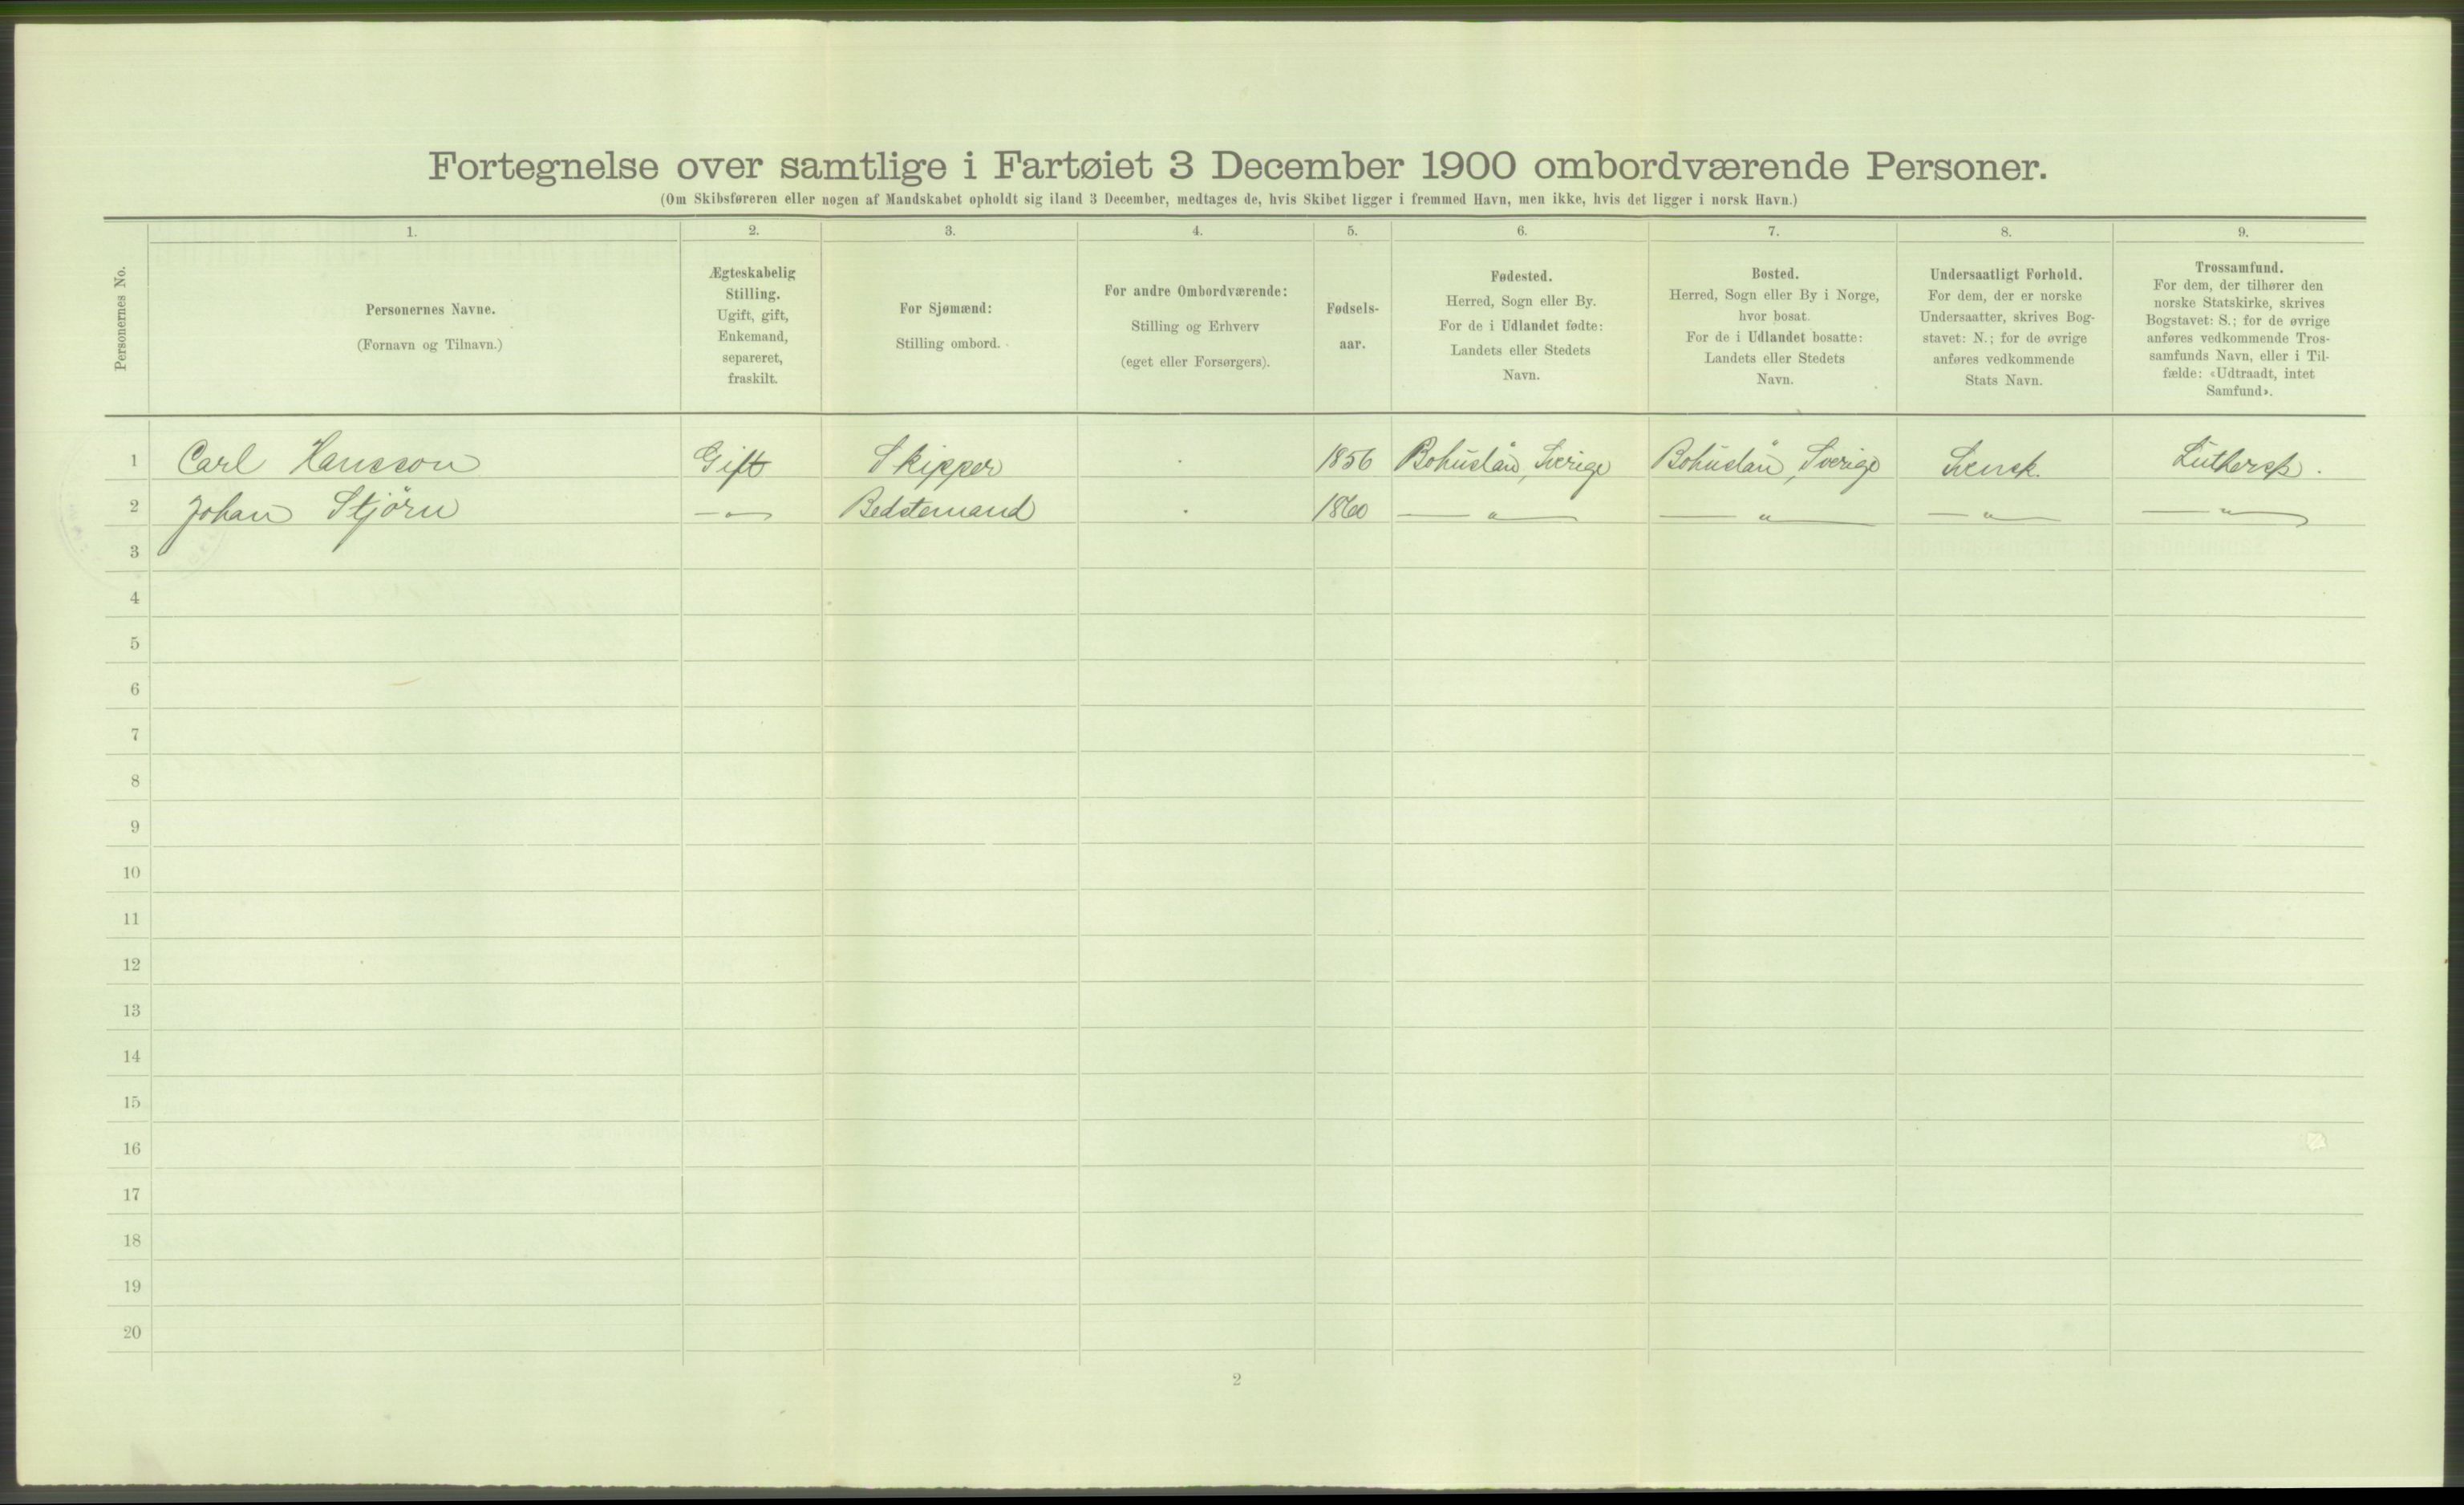 RA, 1900 Census - ship lists from ships in Norwegian harbours, harbours abroad and at sea, 1900, p. 40